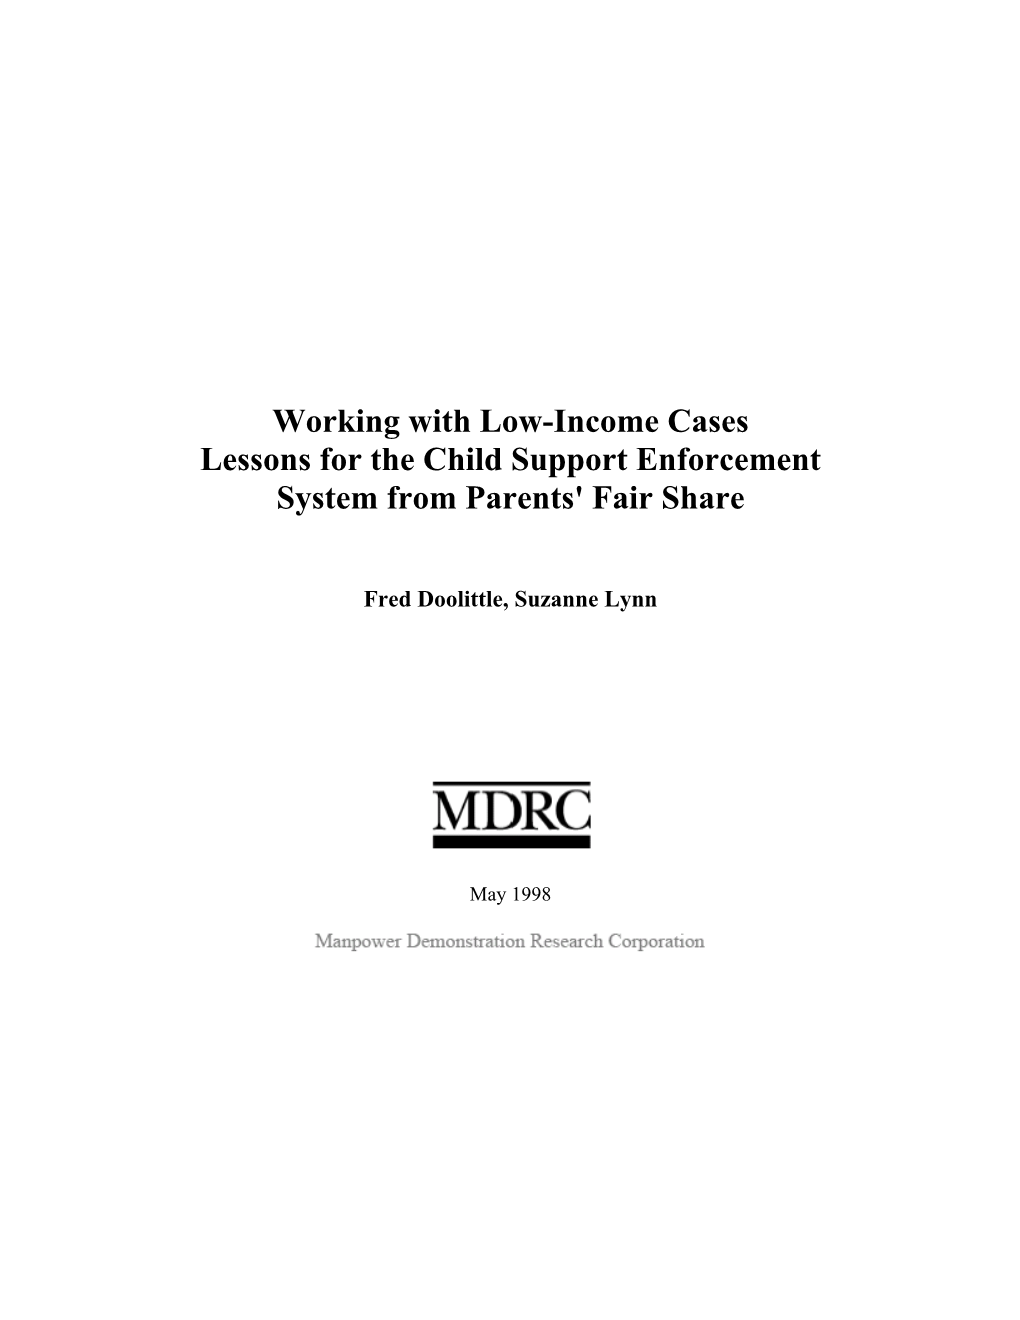 Working with Low-Income Cases Lessons for the Child Support Enforcement System from Parents' Fair Share